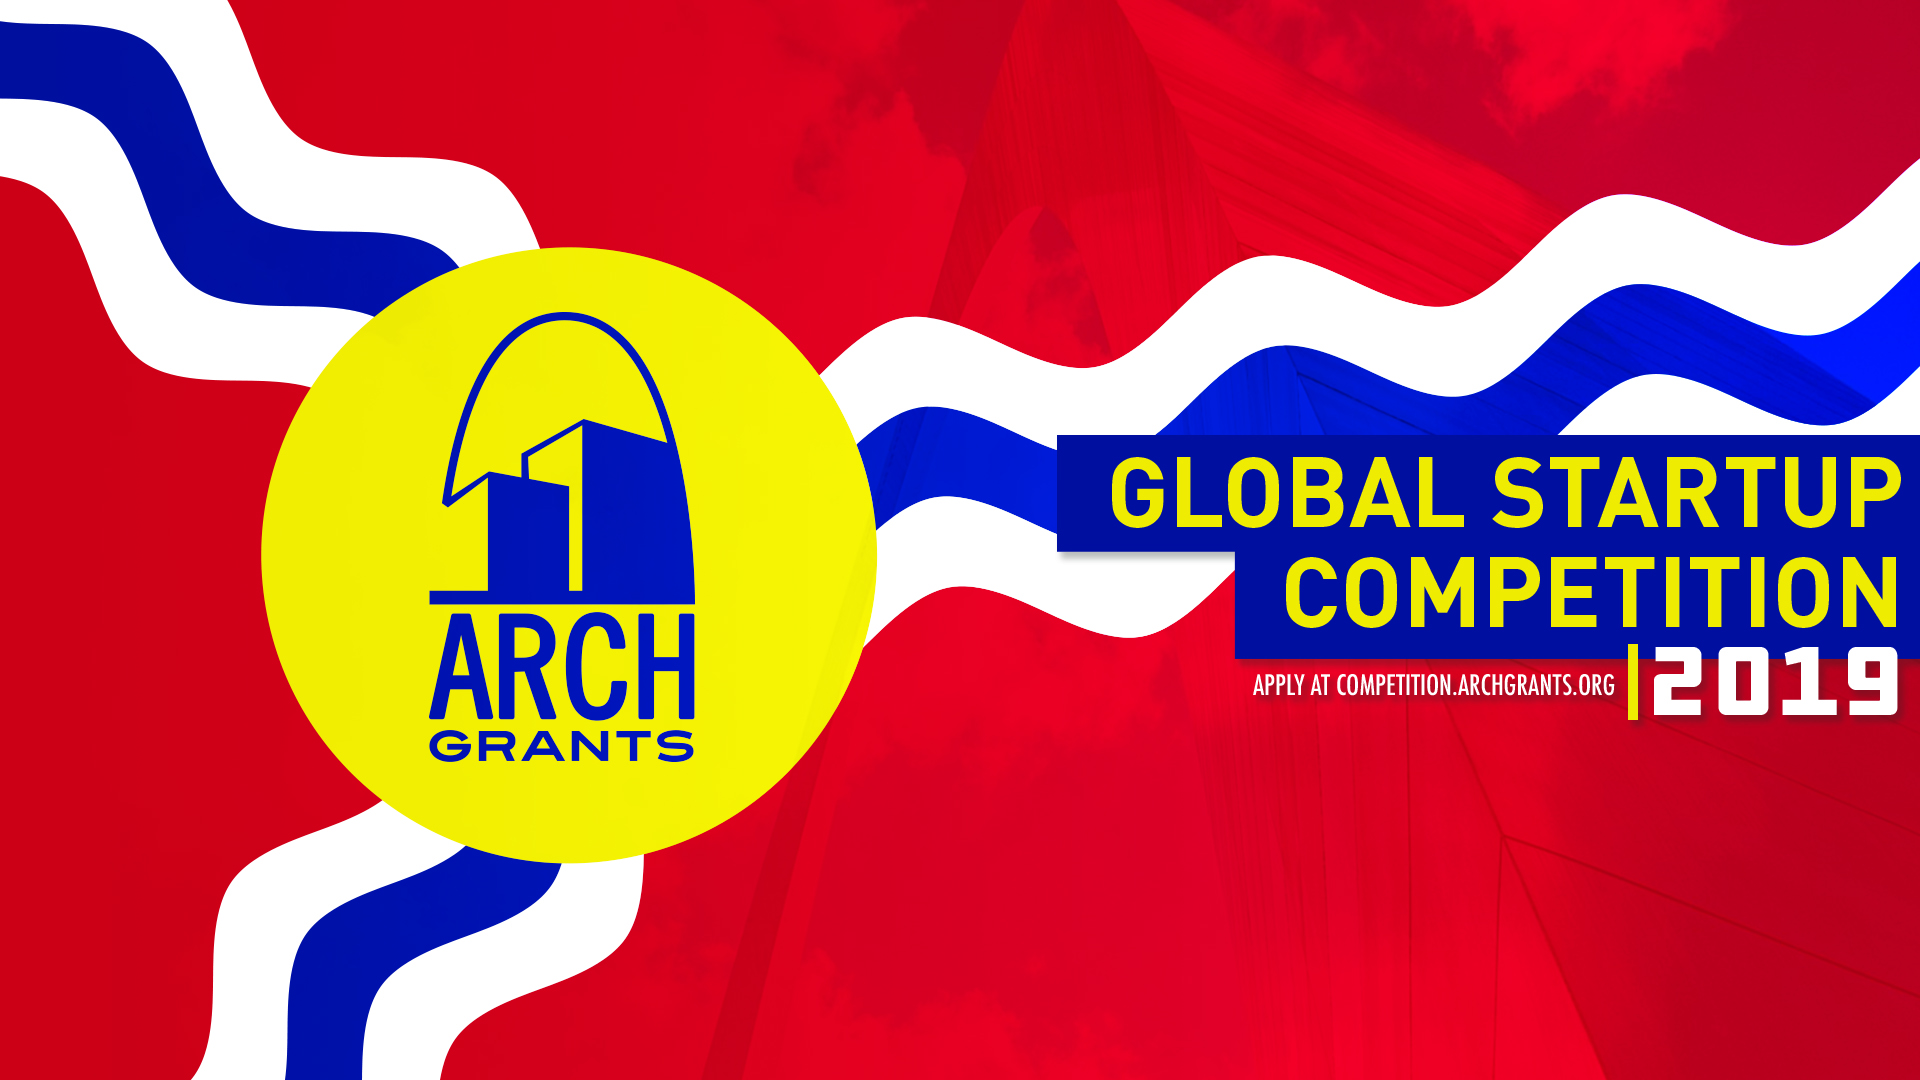 Arch Grants Global Startup Competition